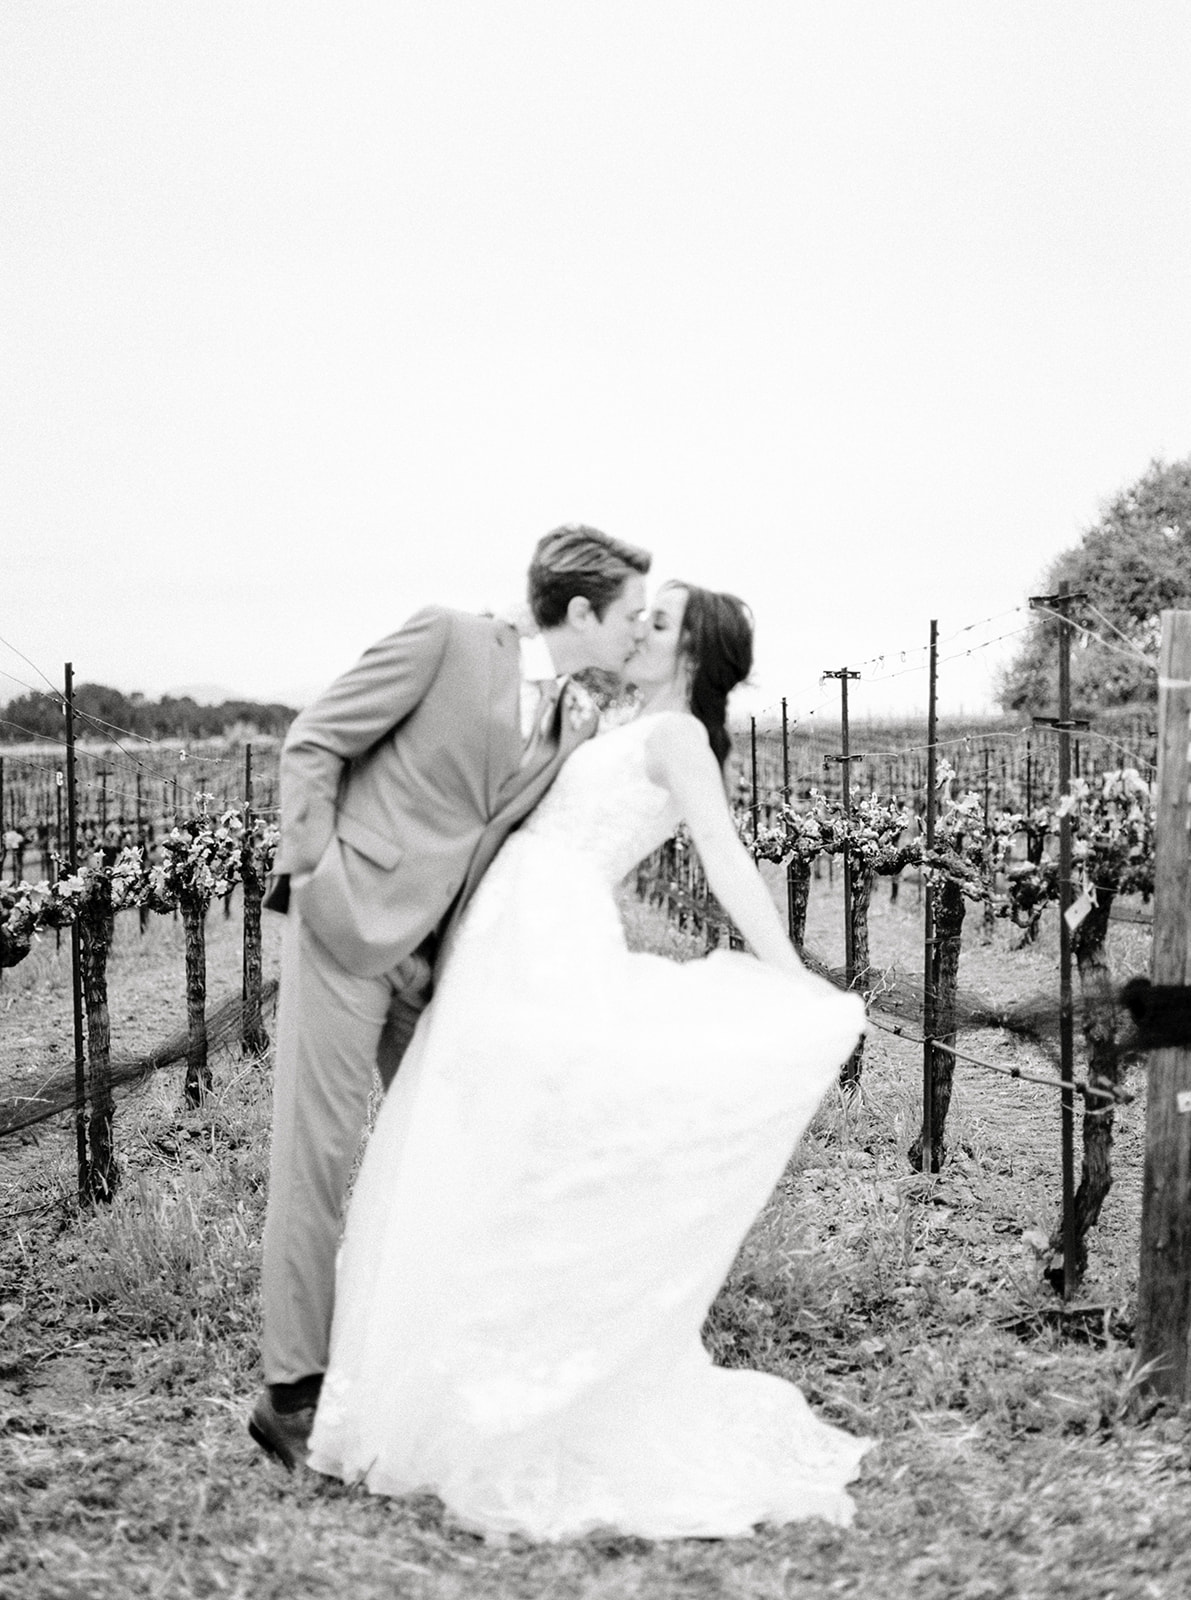 Intimate moment between newlyweds at Sunstone Winery, photographed by Tiffany Longeway, Southern California's luxury wed